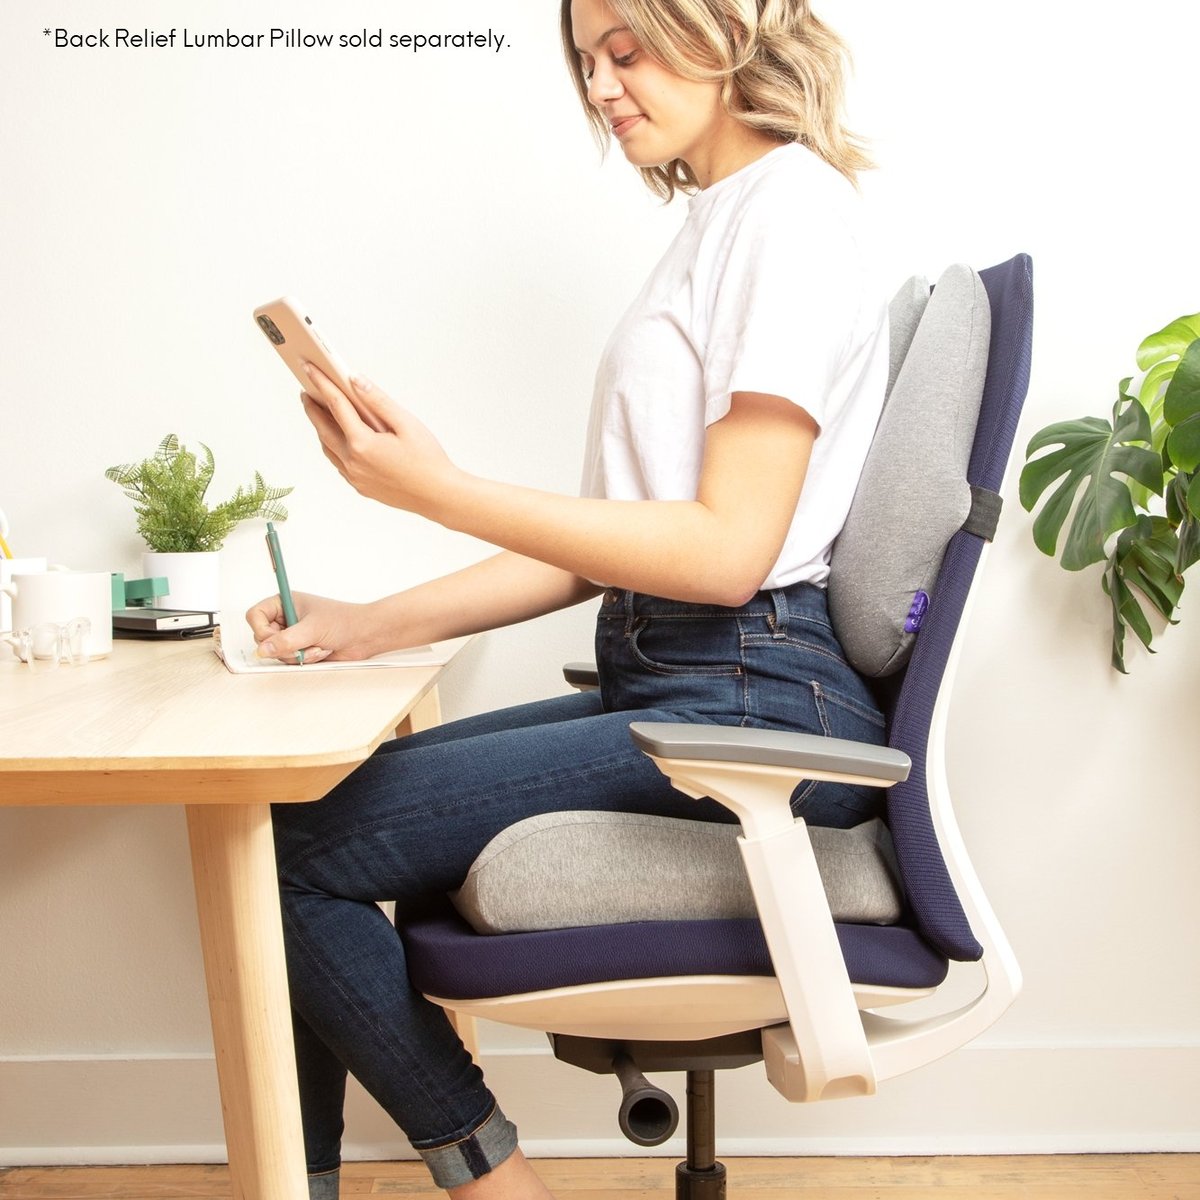 Benefits of Using Seat Cushion for Working From Home